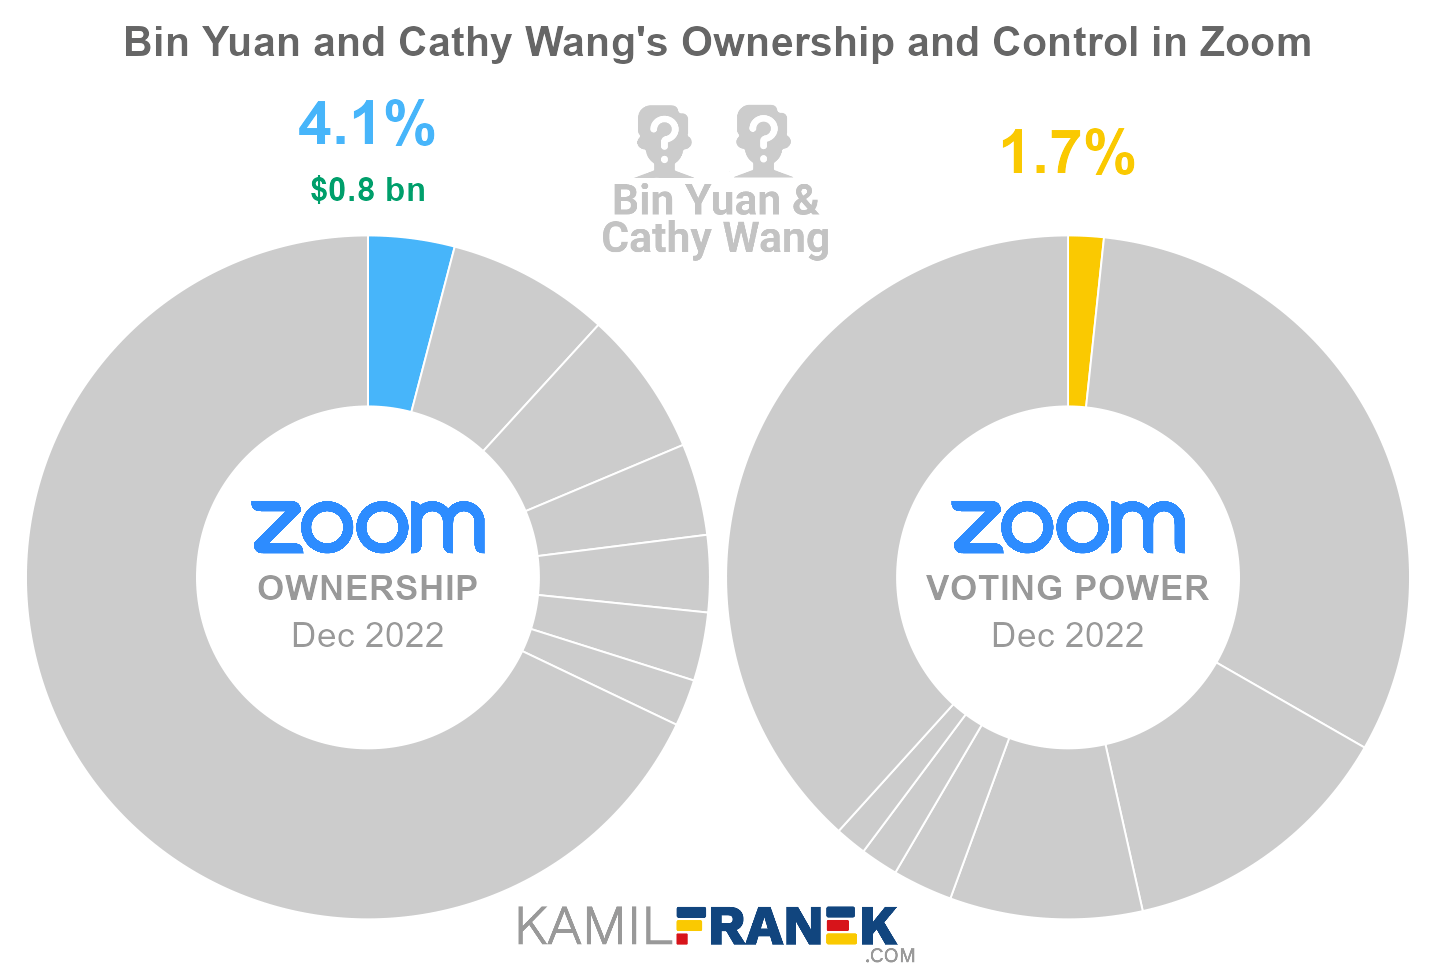 Bin Yuan and Cathy Wang's share ownership and voting power in Zoom (chart)